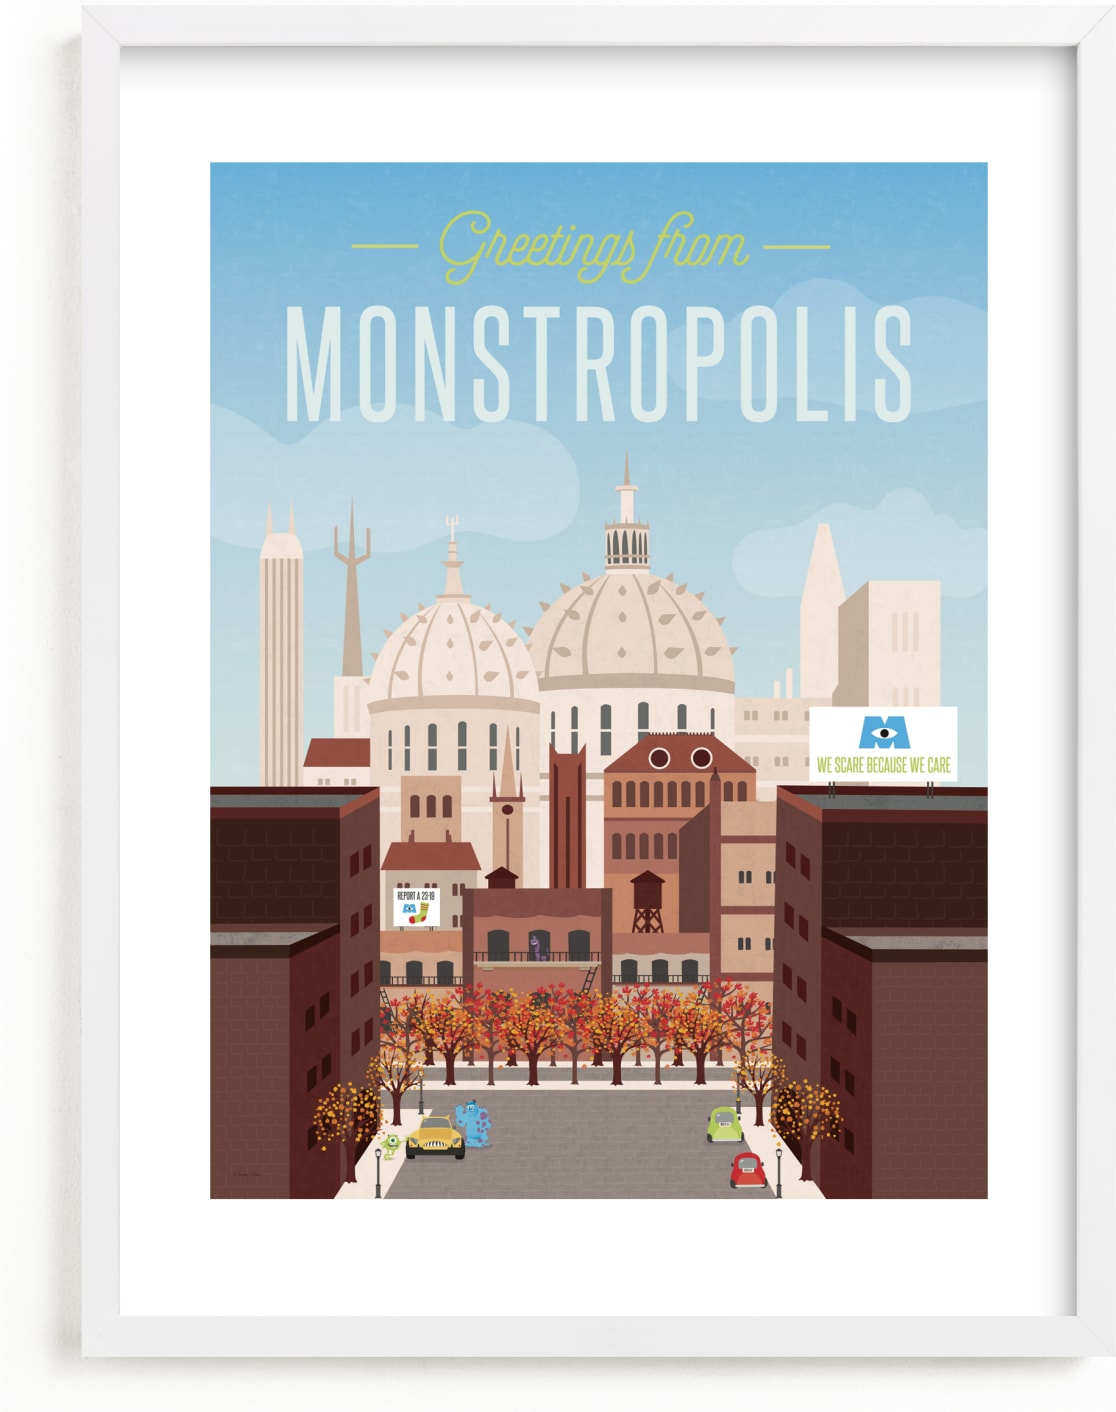 This is a blue disney art by Erica Krystek called Greetings from Monstropolis from Disney and Pixar's Monster's Inc.